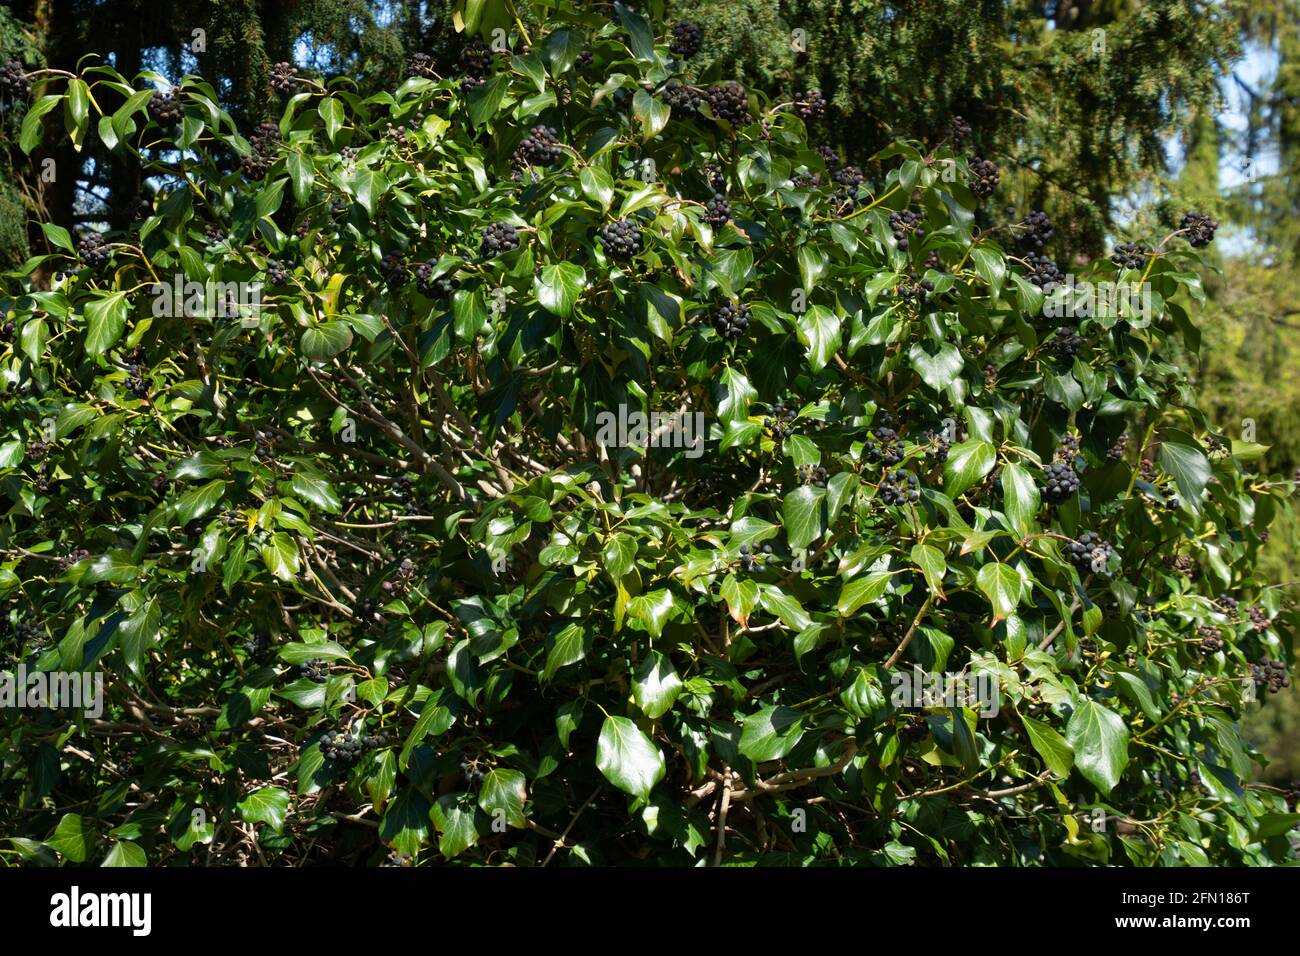 evergreen Ivy or Hedera helix with black berries in the ornamental garden Stock Photo